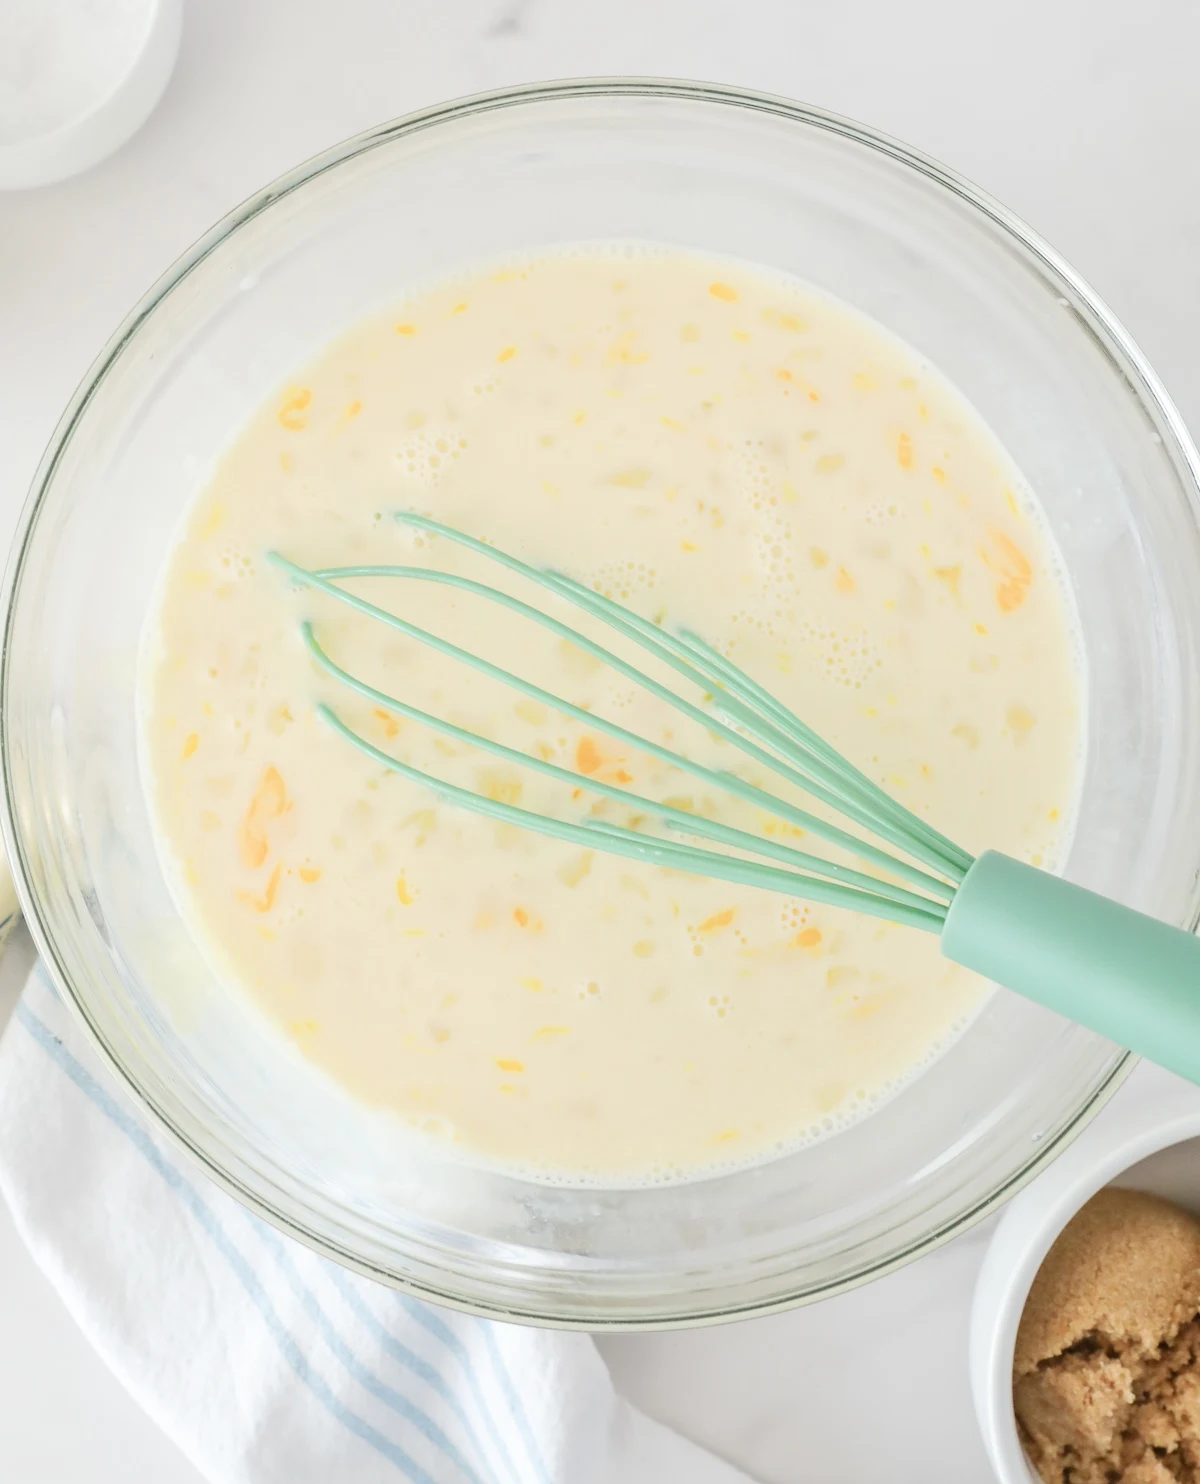 mix eggs, milk, half and half, vanilla extract, and sugar in a bowl